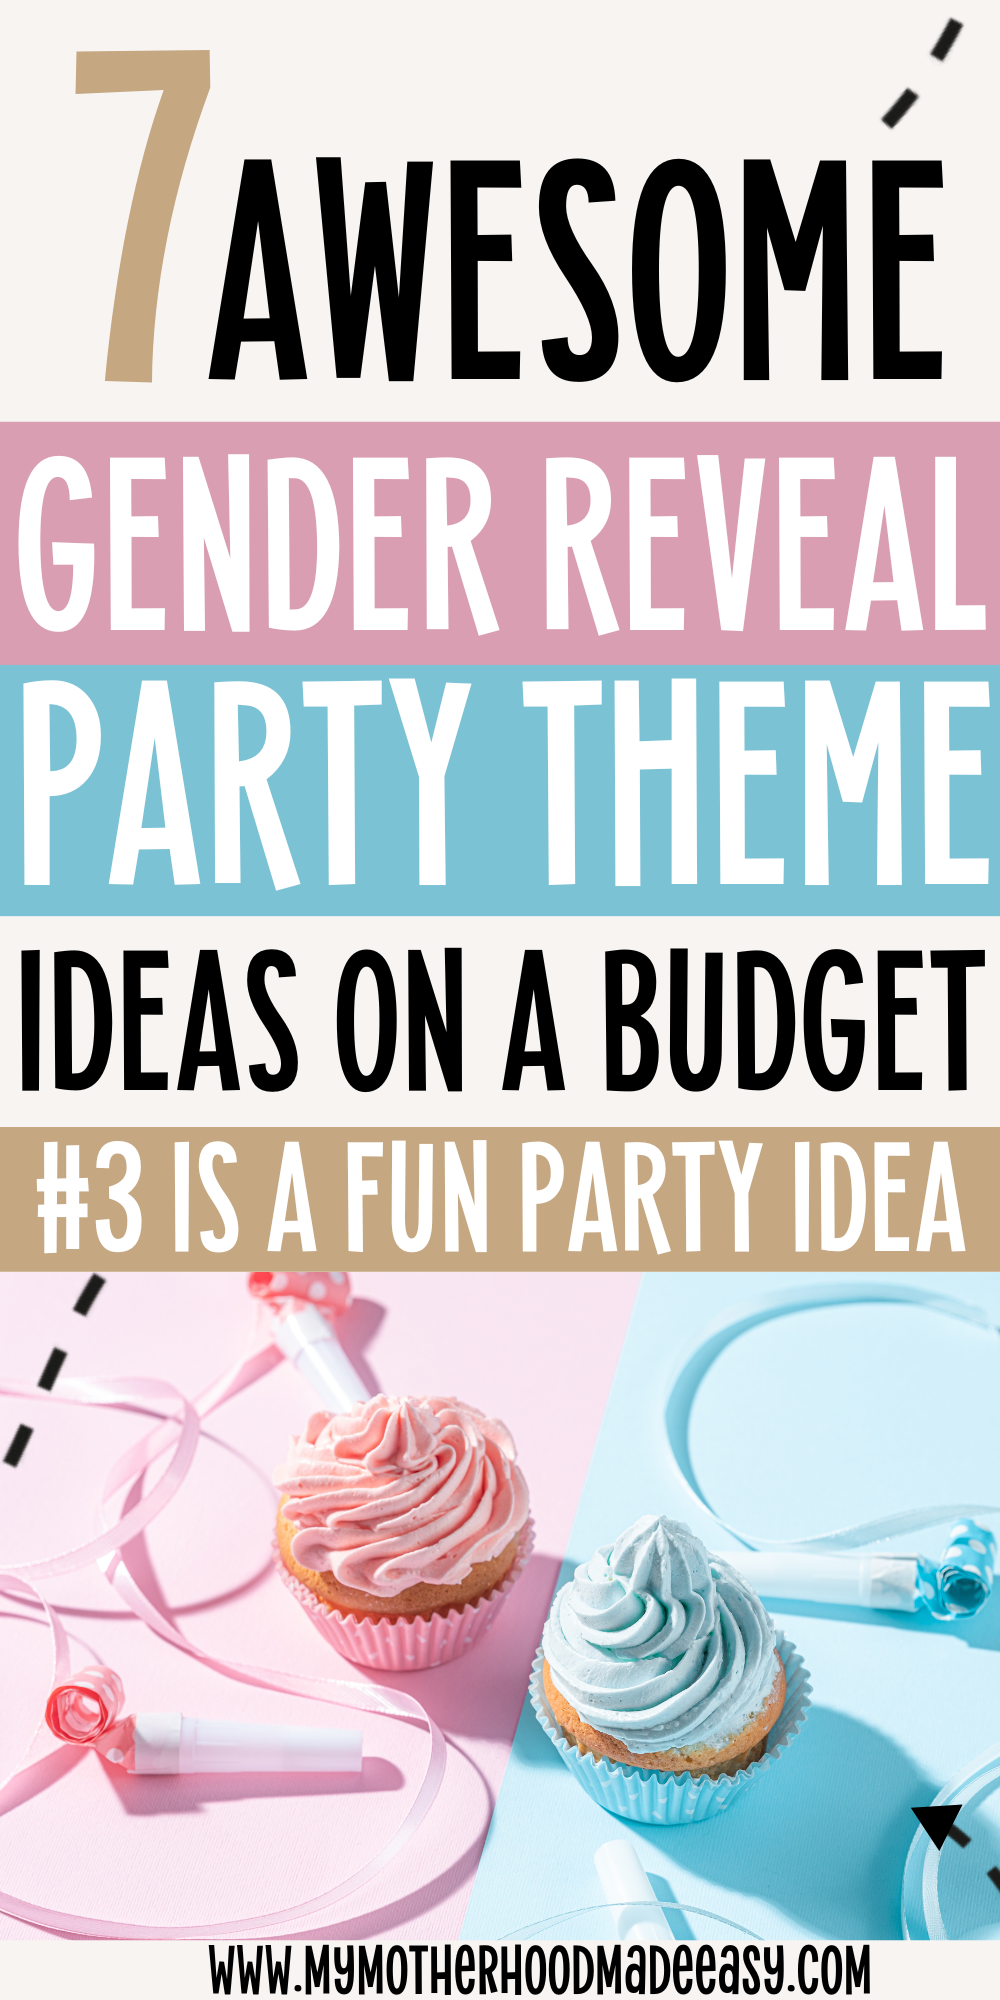 Looking for the perfect gender reveal party idea? Here are 7 Awesome Gender Reveal Party Theme Ideas On A Budget, Click for more! The Perfect gender reveal ideas.